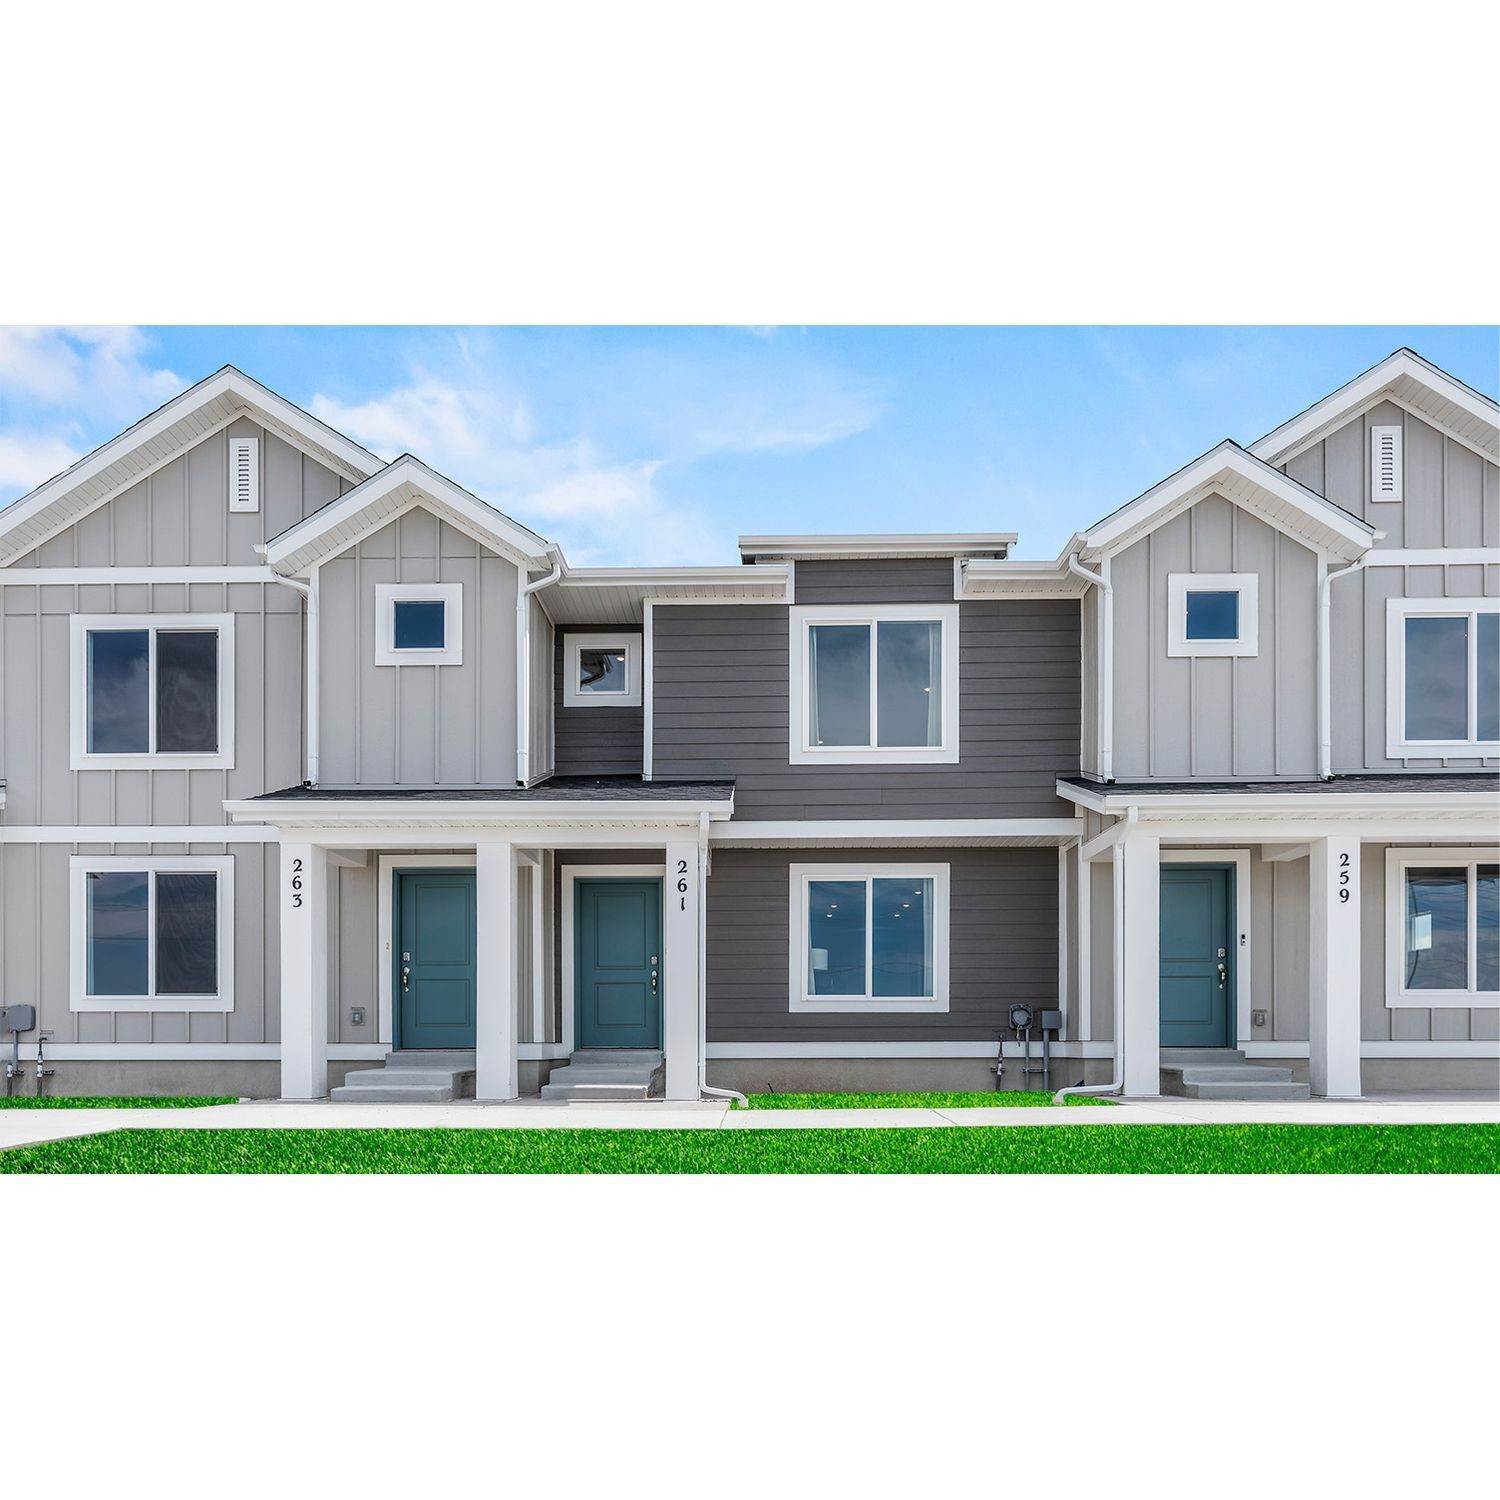 8. Western Acres xây dựng tại 259 East Serenity Avenue, Tooele, UT 84074